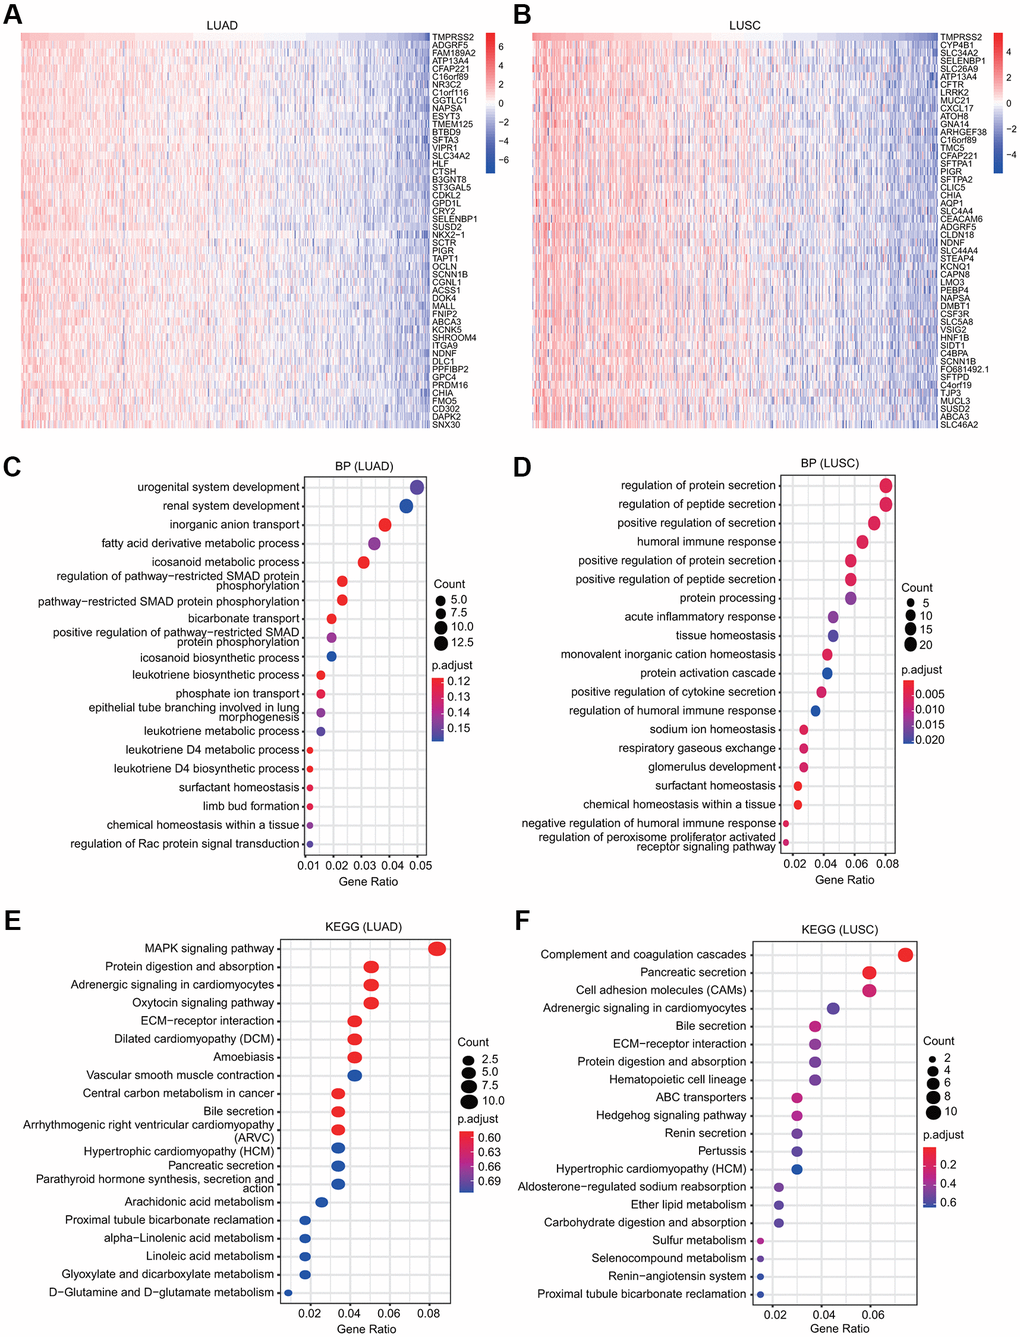 GO and KEGG analyses for TMPRSS2 in lung cancer. (A, B) Heatmaps showing the top 50 genes that were positively correlated with TMPRSS2 in LUAD and LUSC. (C, D) Top 20 enrichment terms in the BP category in LUAD and LUSC. (E, F) Top 20 pathways enriched in the KEGG analysis in LUAD and LUSC.